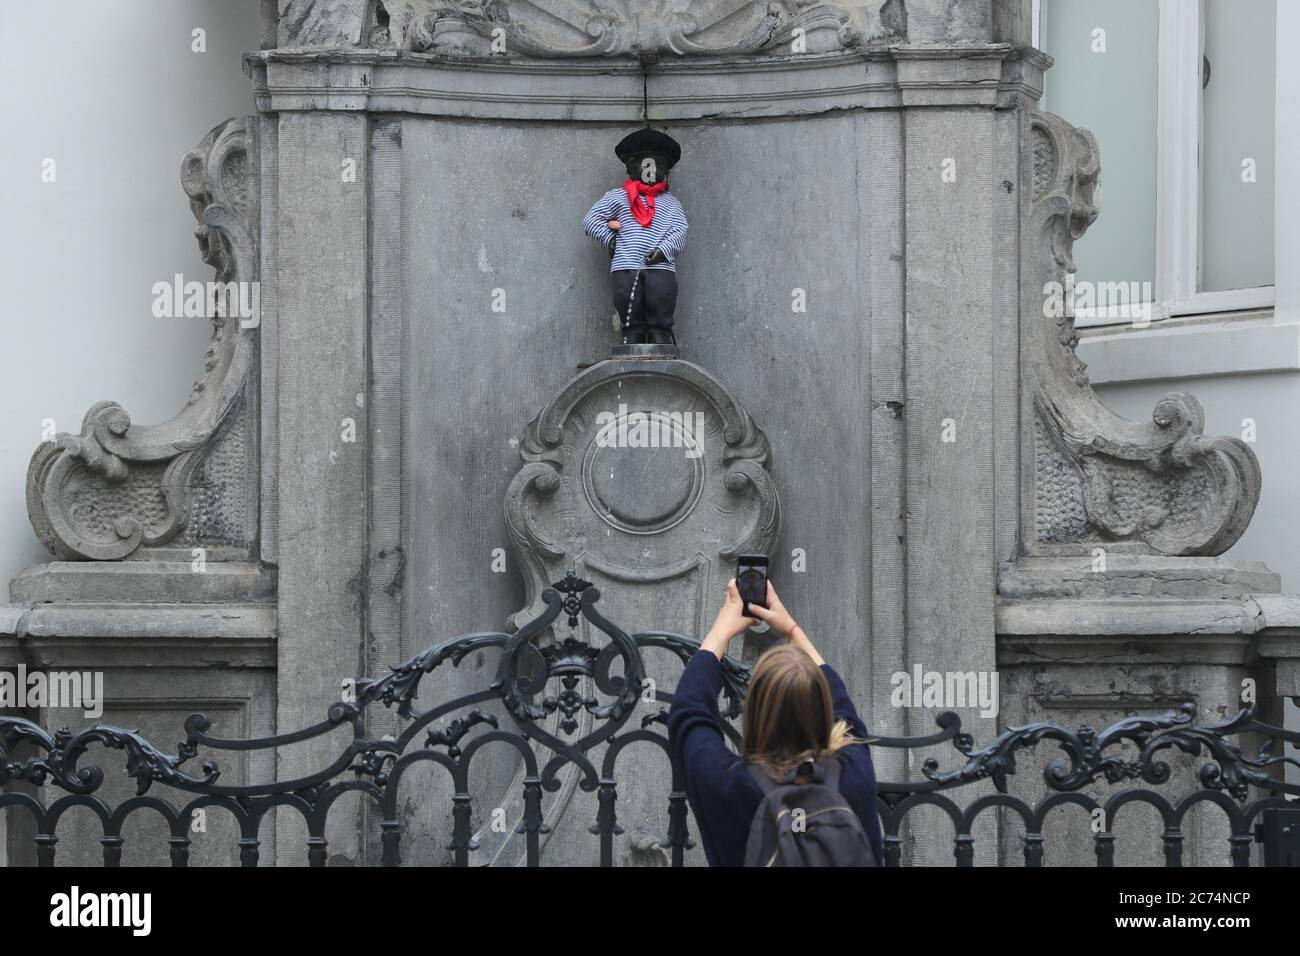 Brussels, Belgium. 14th July, 2020. A visitor takes photos of the Manneken-Pis which wears a suit with beret and baguette in Brussels, Belgium, July 14, 2020. Manneken-Pis, the symbol of Brussels folklore, gets costumes at major events. He wore a suit with beret and baguette on Tuesday to commemorate the French national day which falls on July 14 every year. Credit: Zheng Huansong/Xinhua/Alamy Live News Stock Photo